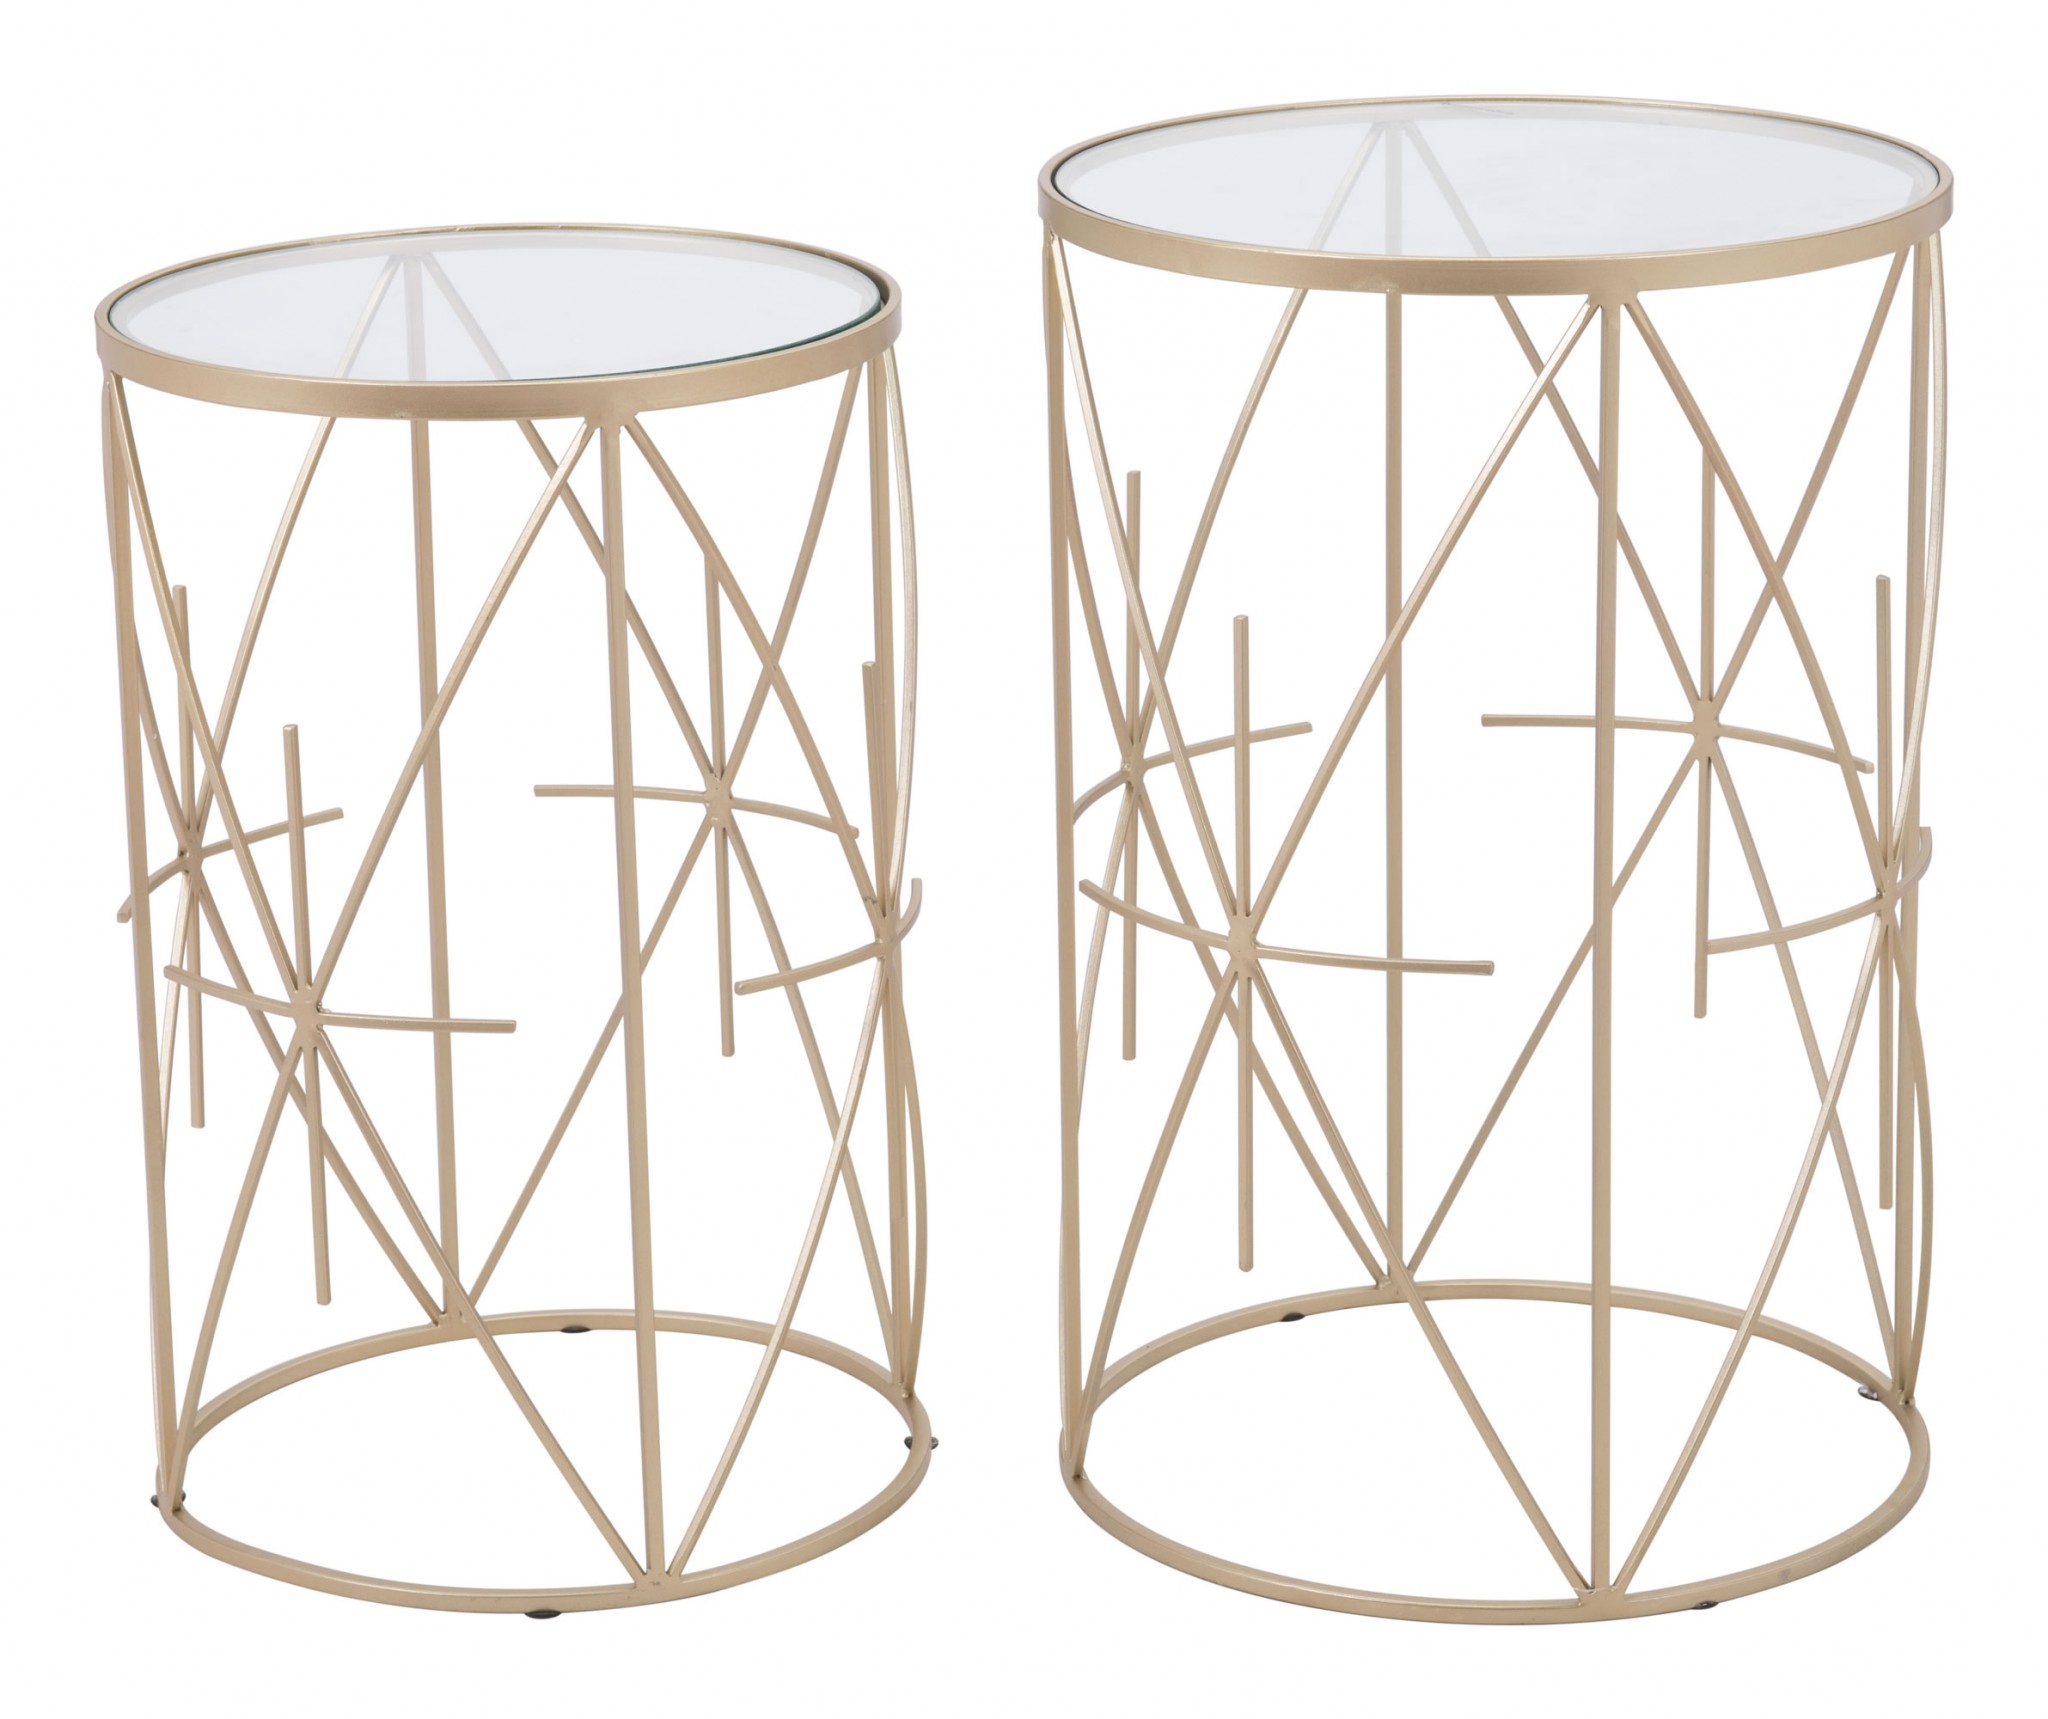 15" x 15" x 22.4" Clear & Gold, Tempered Glass & Steel, Side Table Set